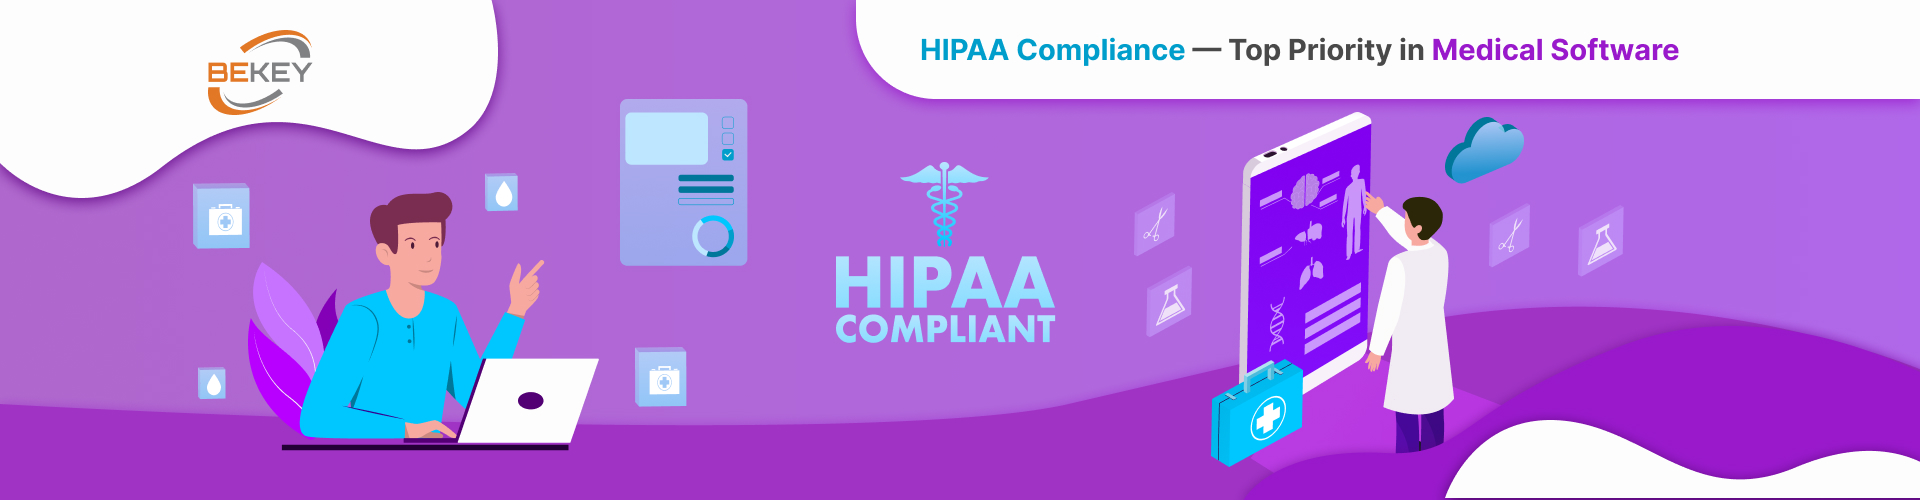 HIPAA Compliance — Top Priority in Medical Software - image